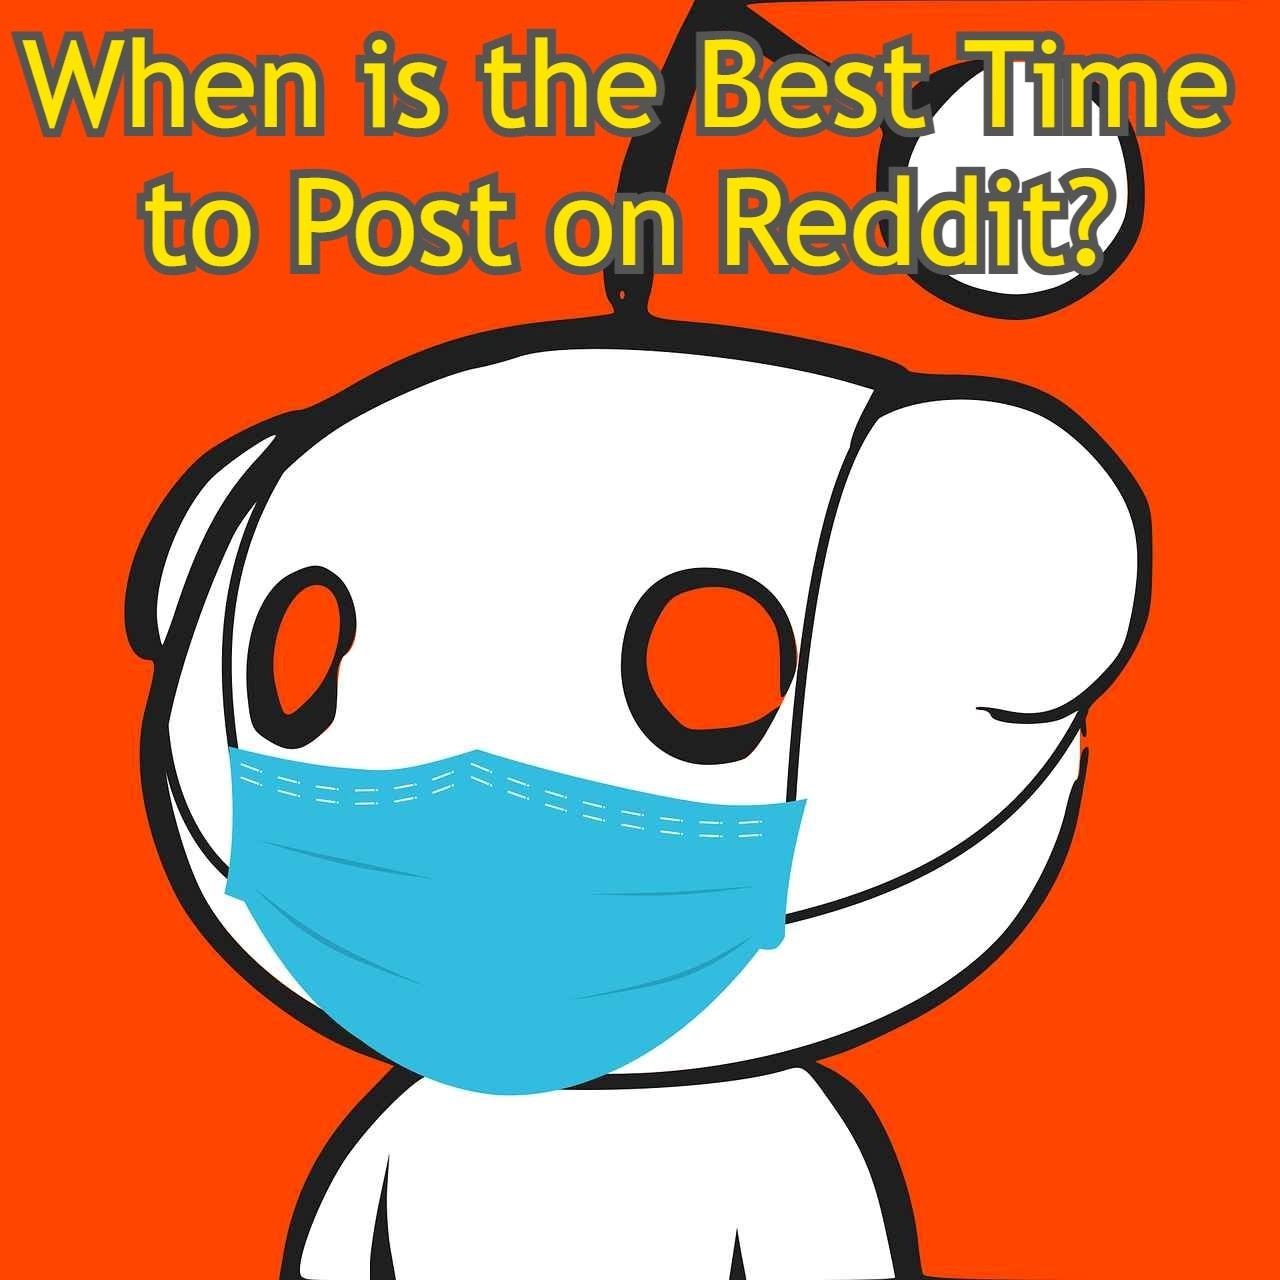 When is the Best Time to Post on Reddit? (2022 Guide)